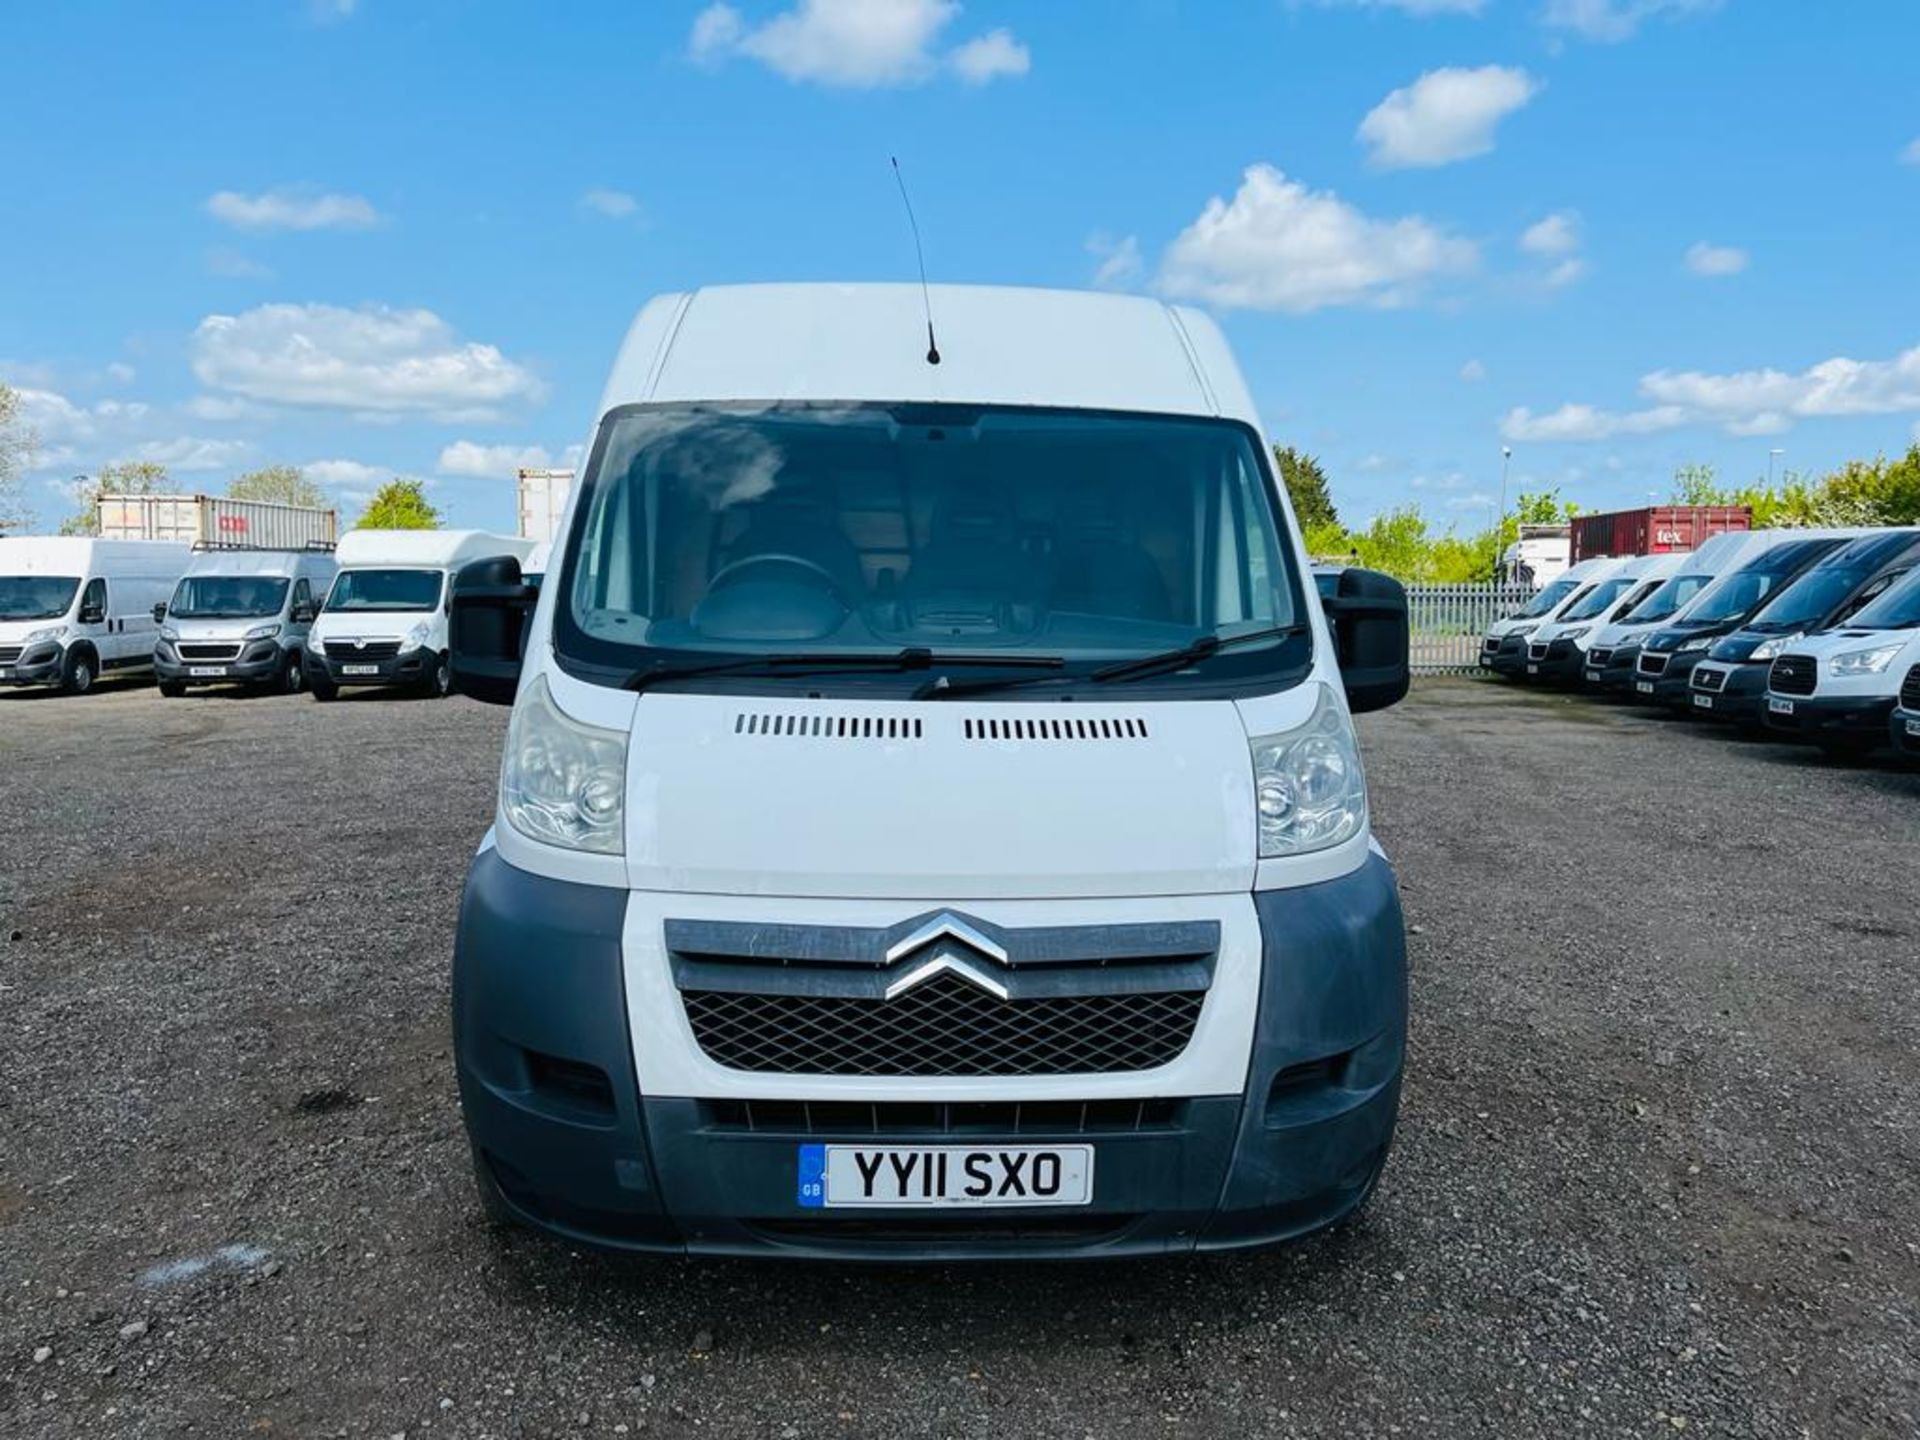 ** ON SALE ** Citreon Relay 2.2 HDI 35 120 L3 H2 2011 '11 Reg' - Panel Van - Only 89,374 Miles - Image 2 of 23